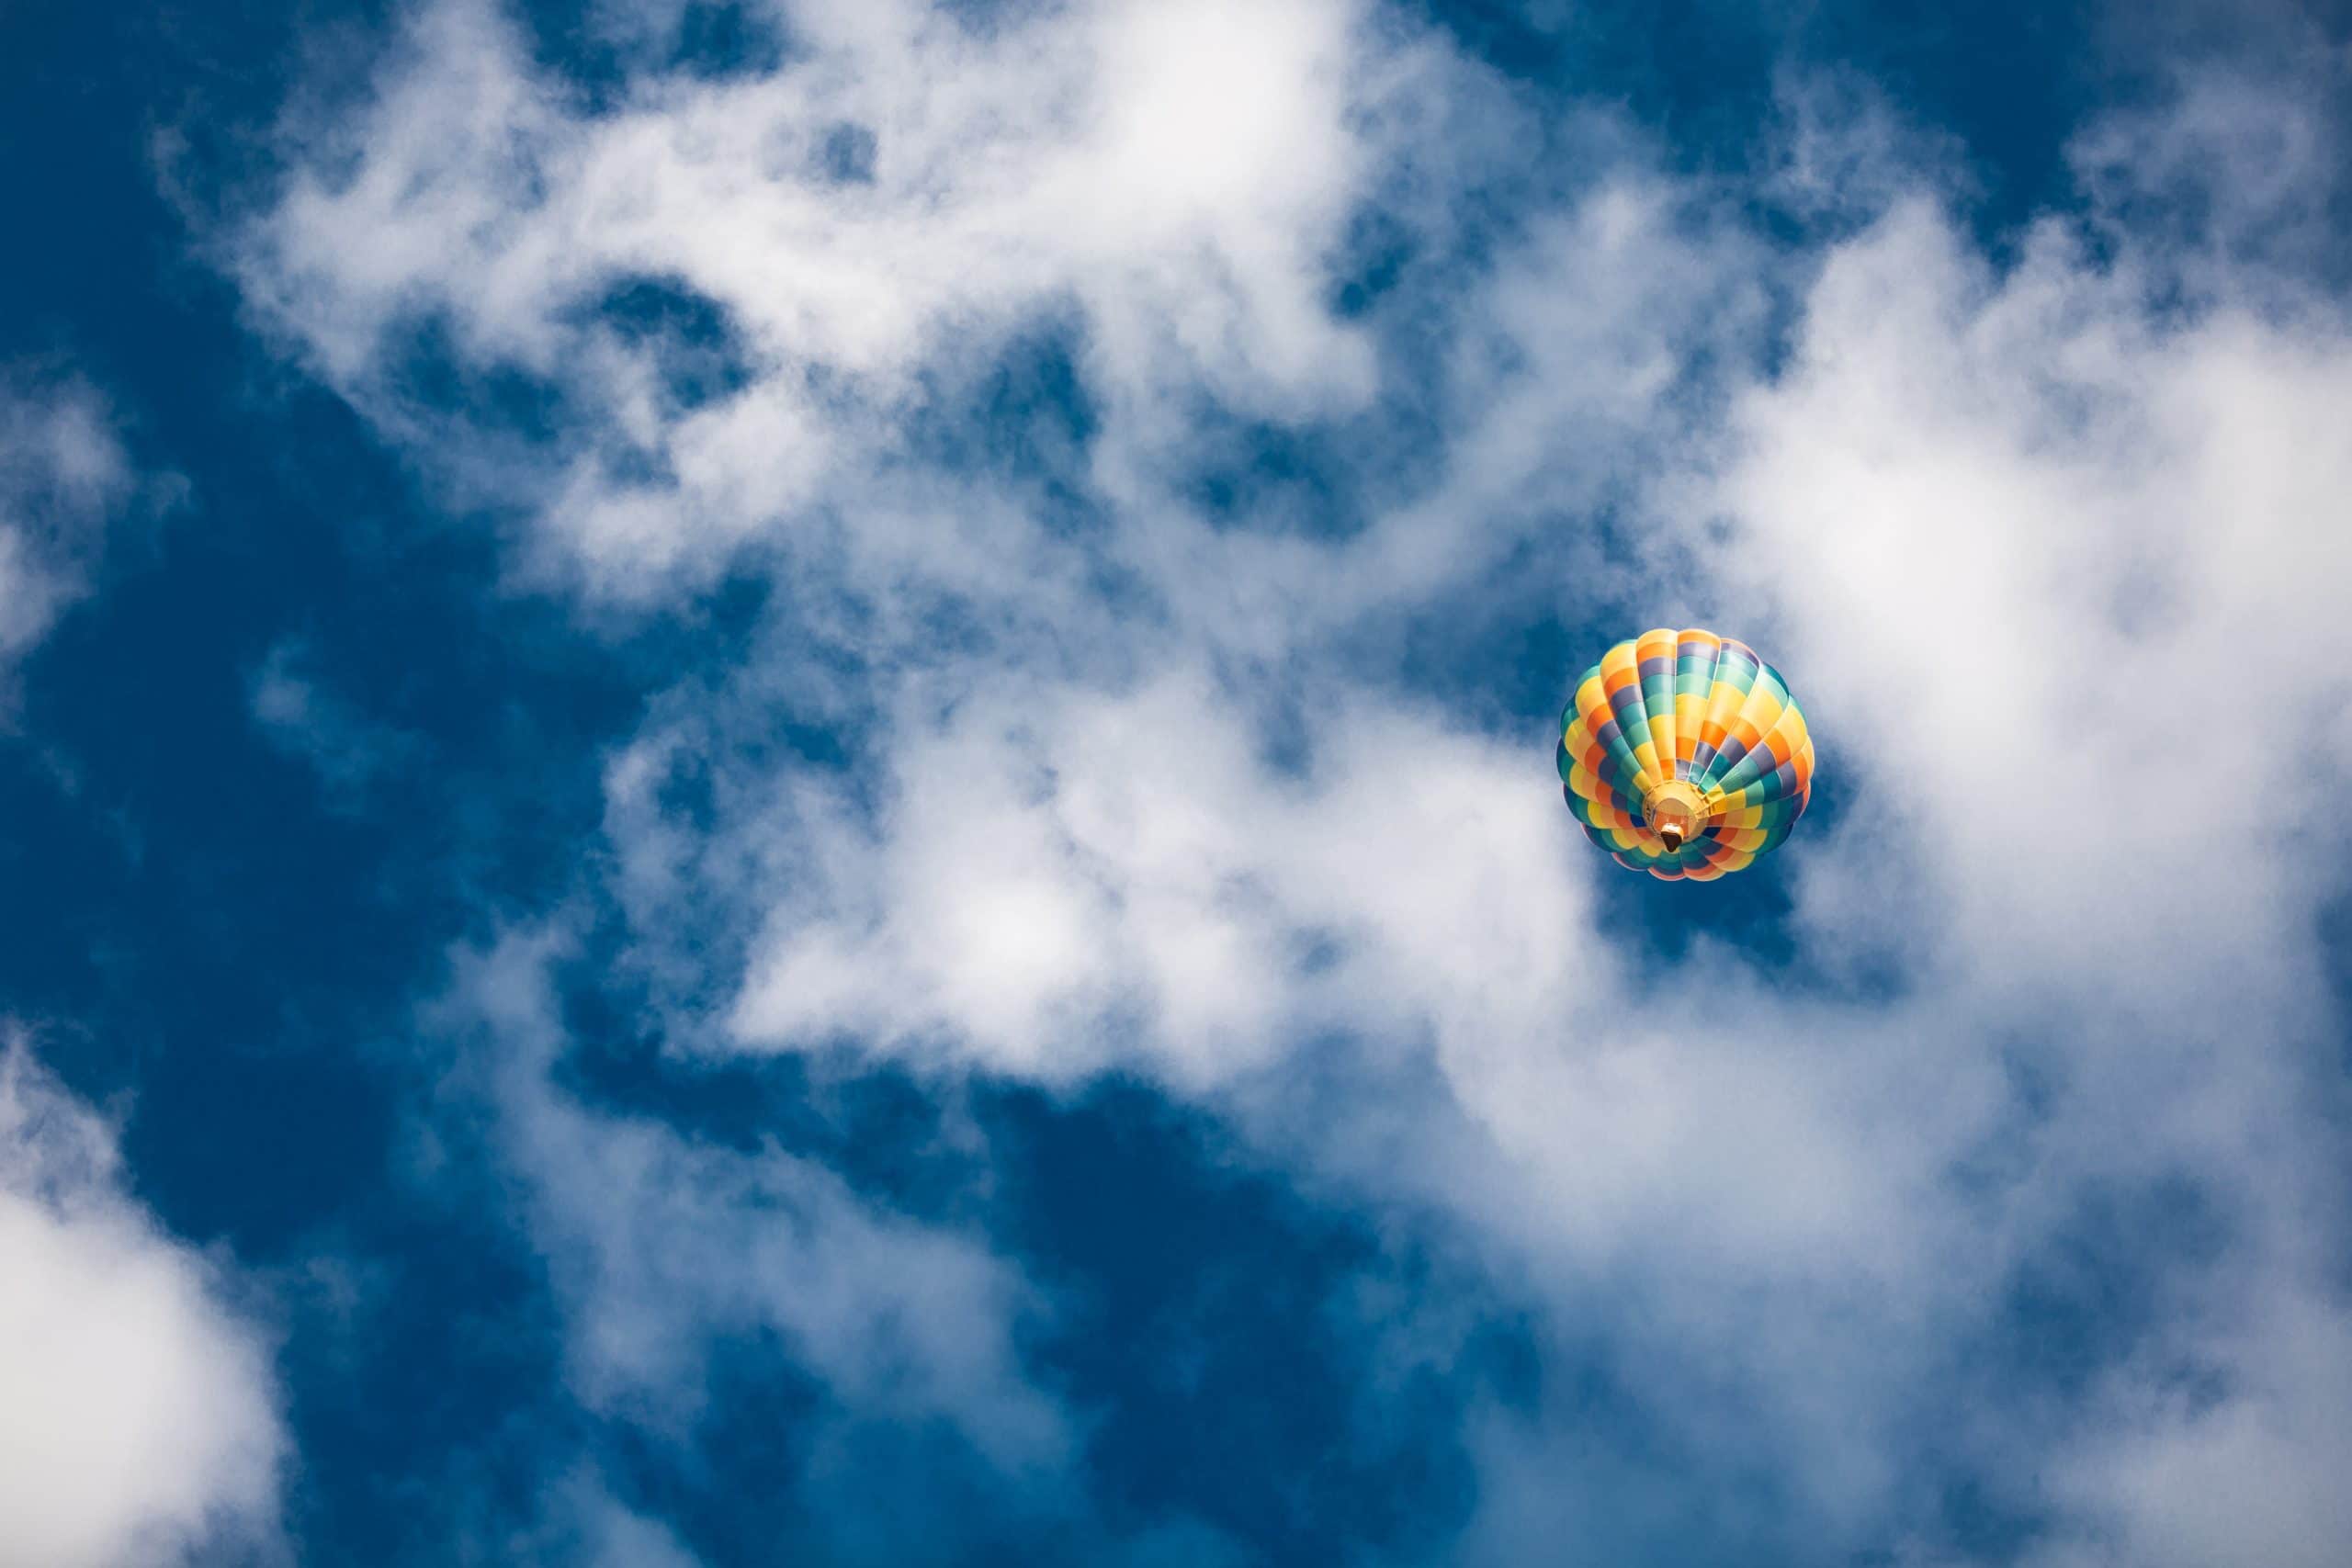 Blue sky with white clouds and a single hot air balloon in flight